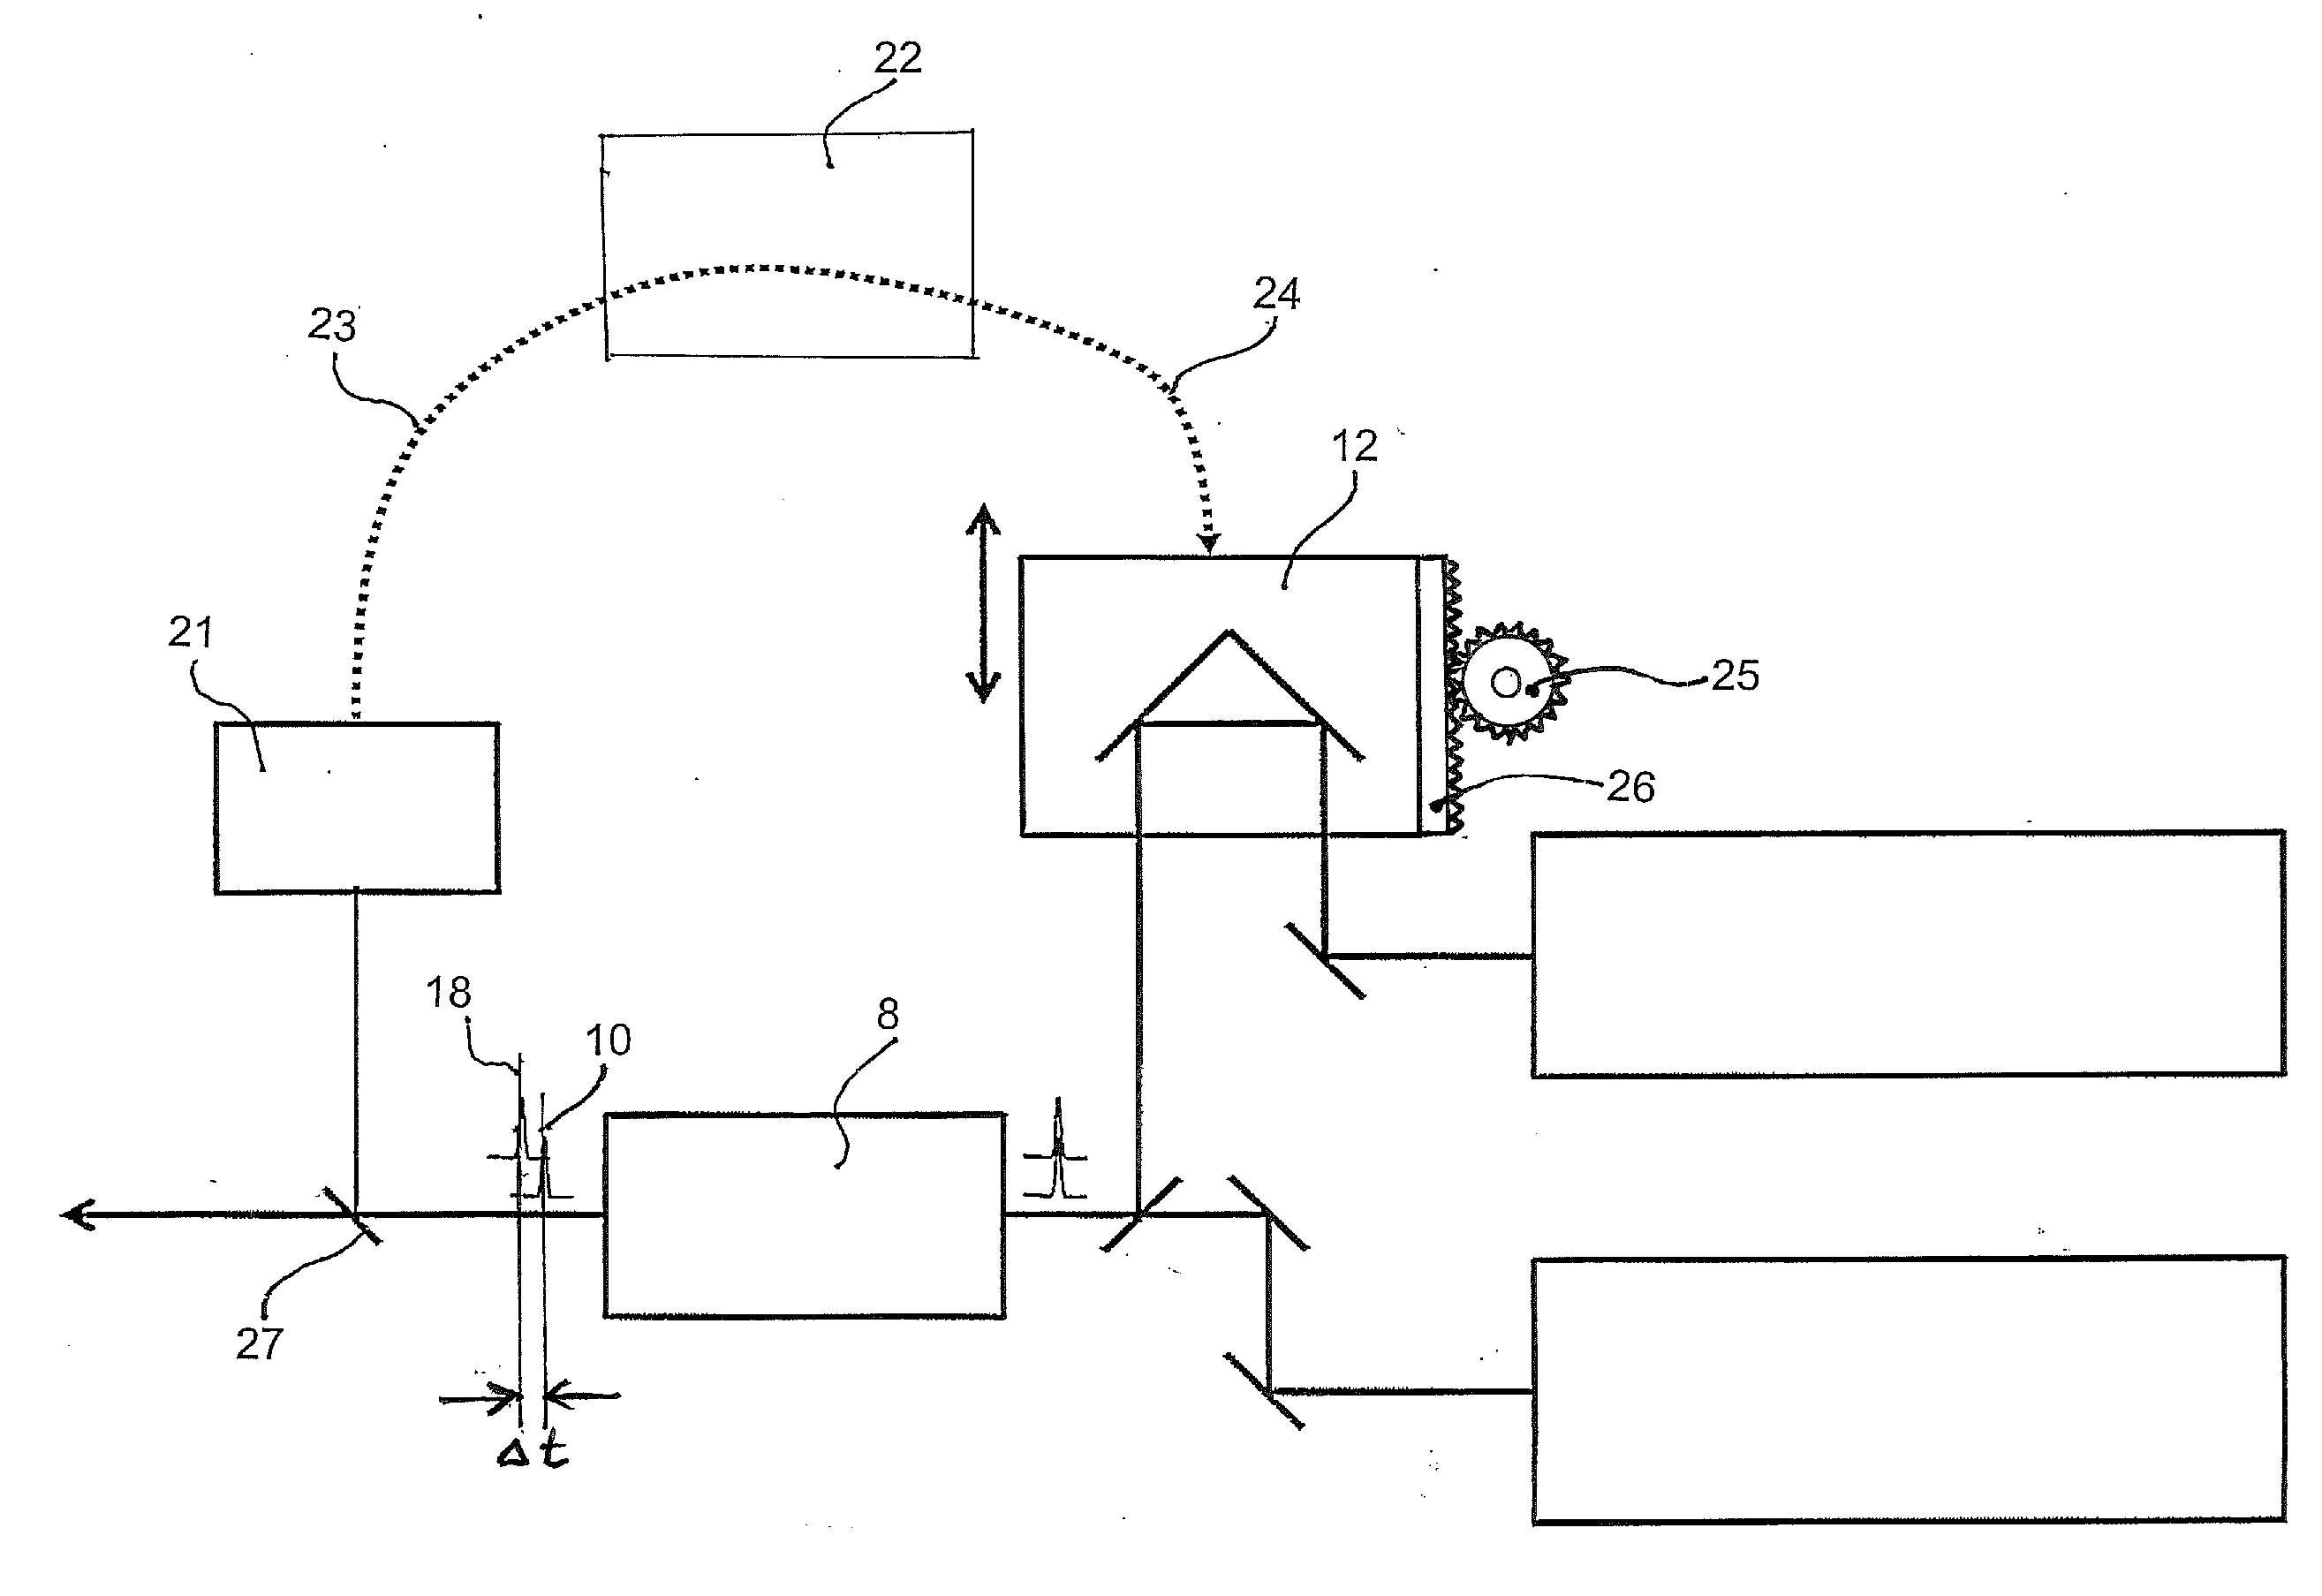 Tunable multiple laser pulse scanning microscope and method of operating the same